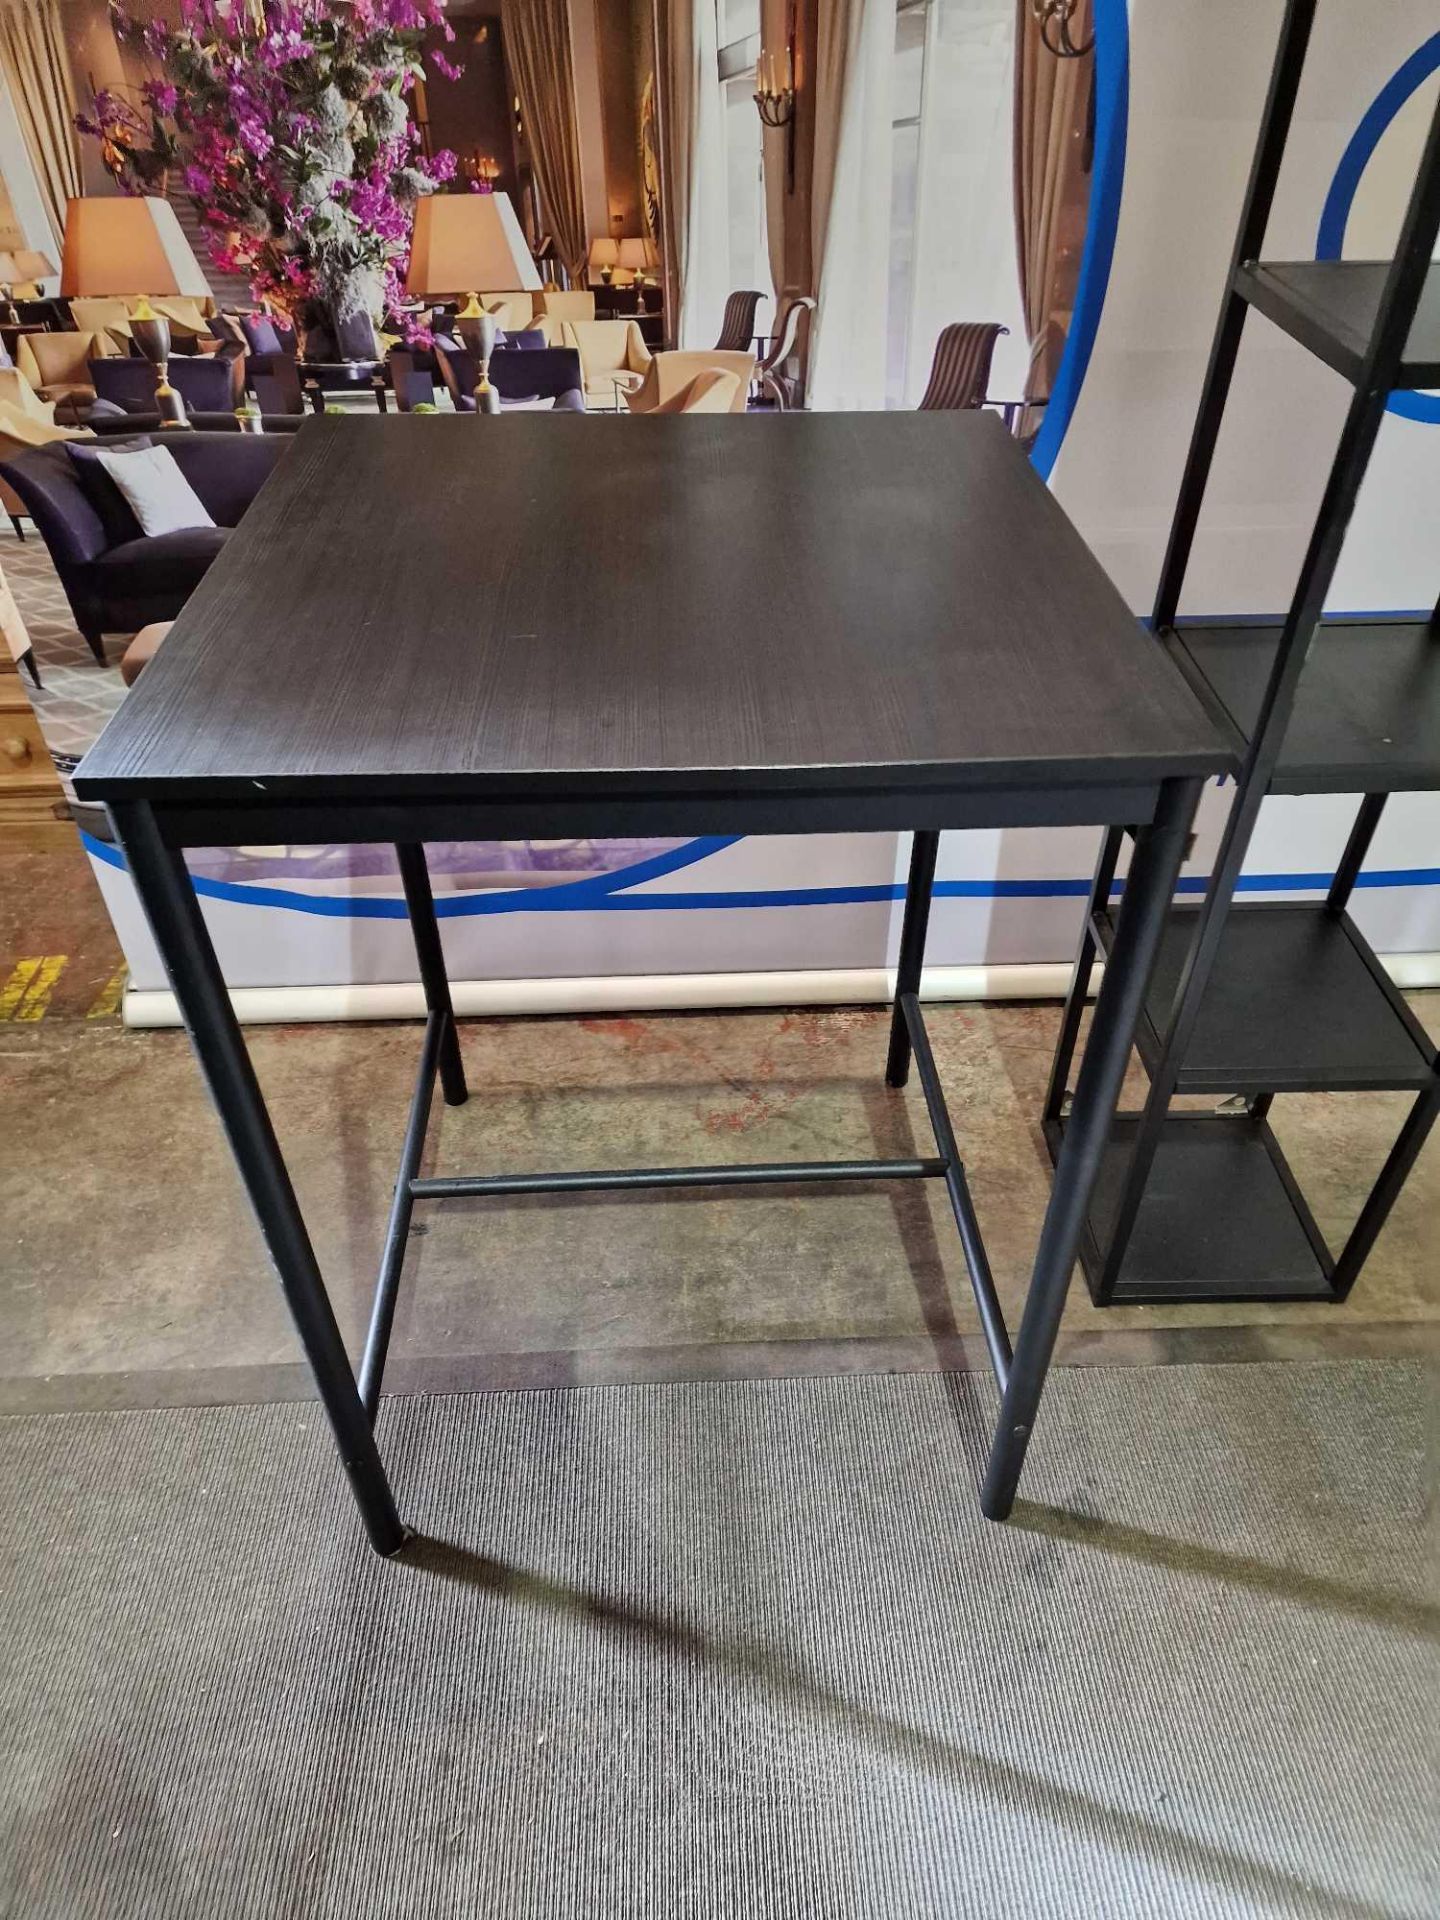 Bar Tables and Storage Shelf comprising ebony black sturdy counter-height bar table melamine top - Image 3 of 4